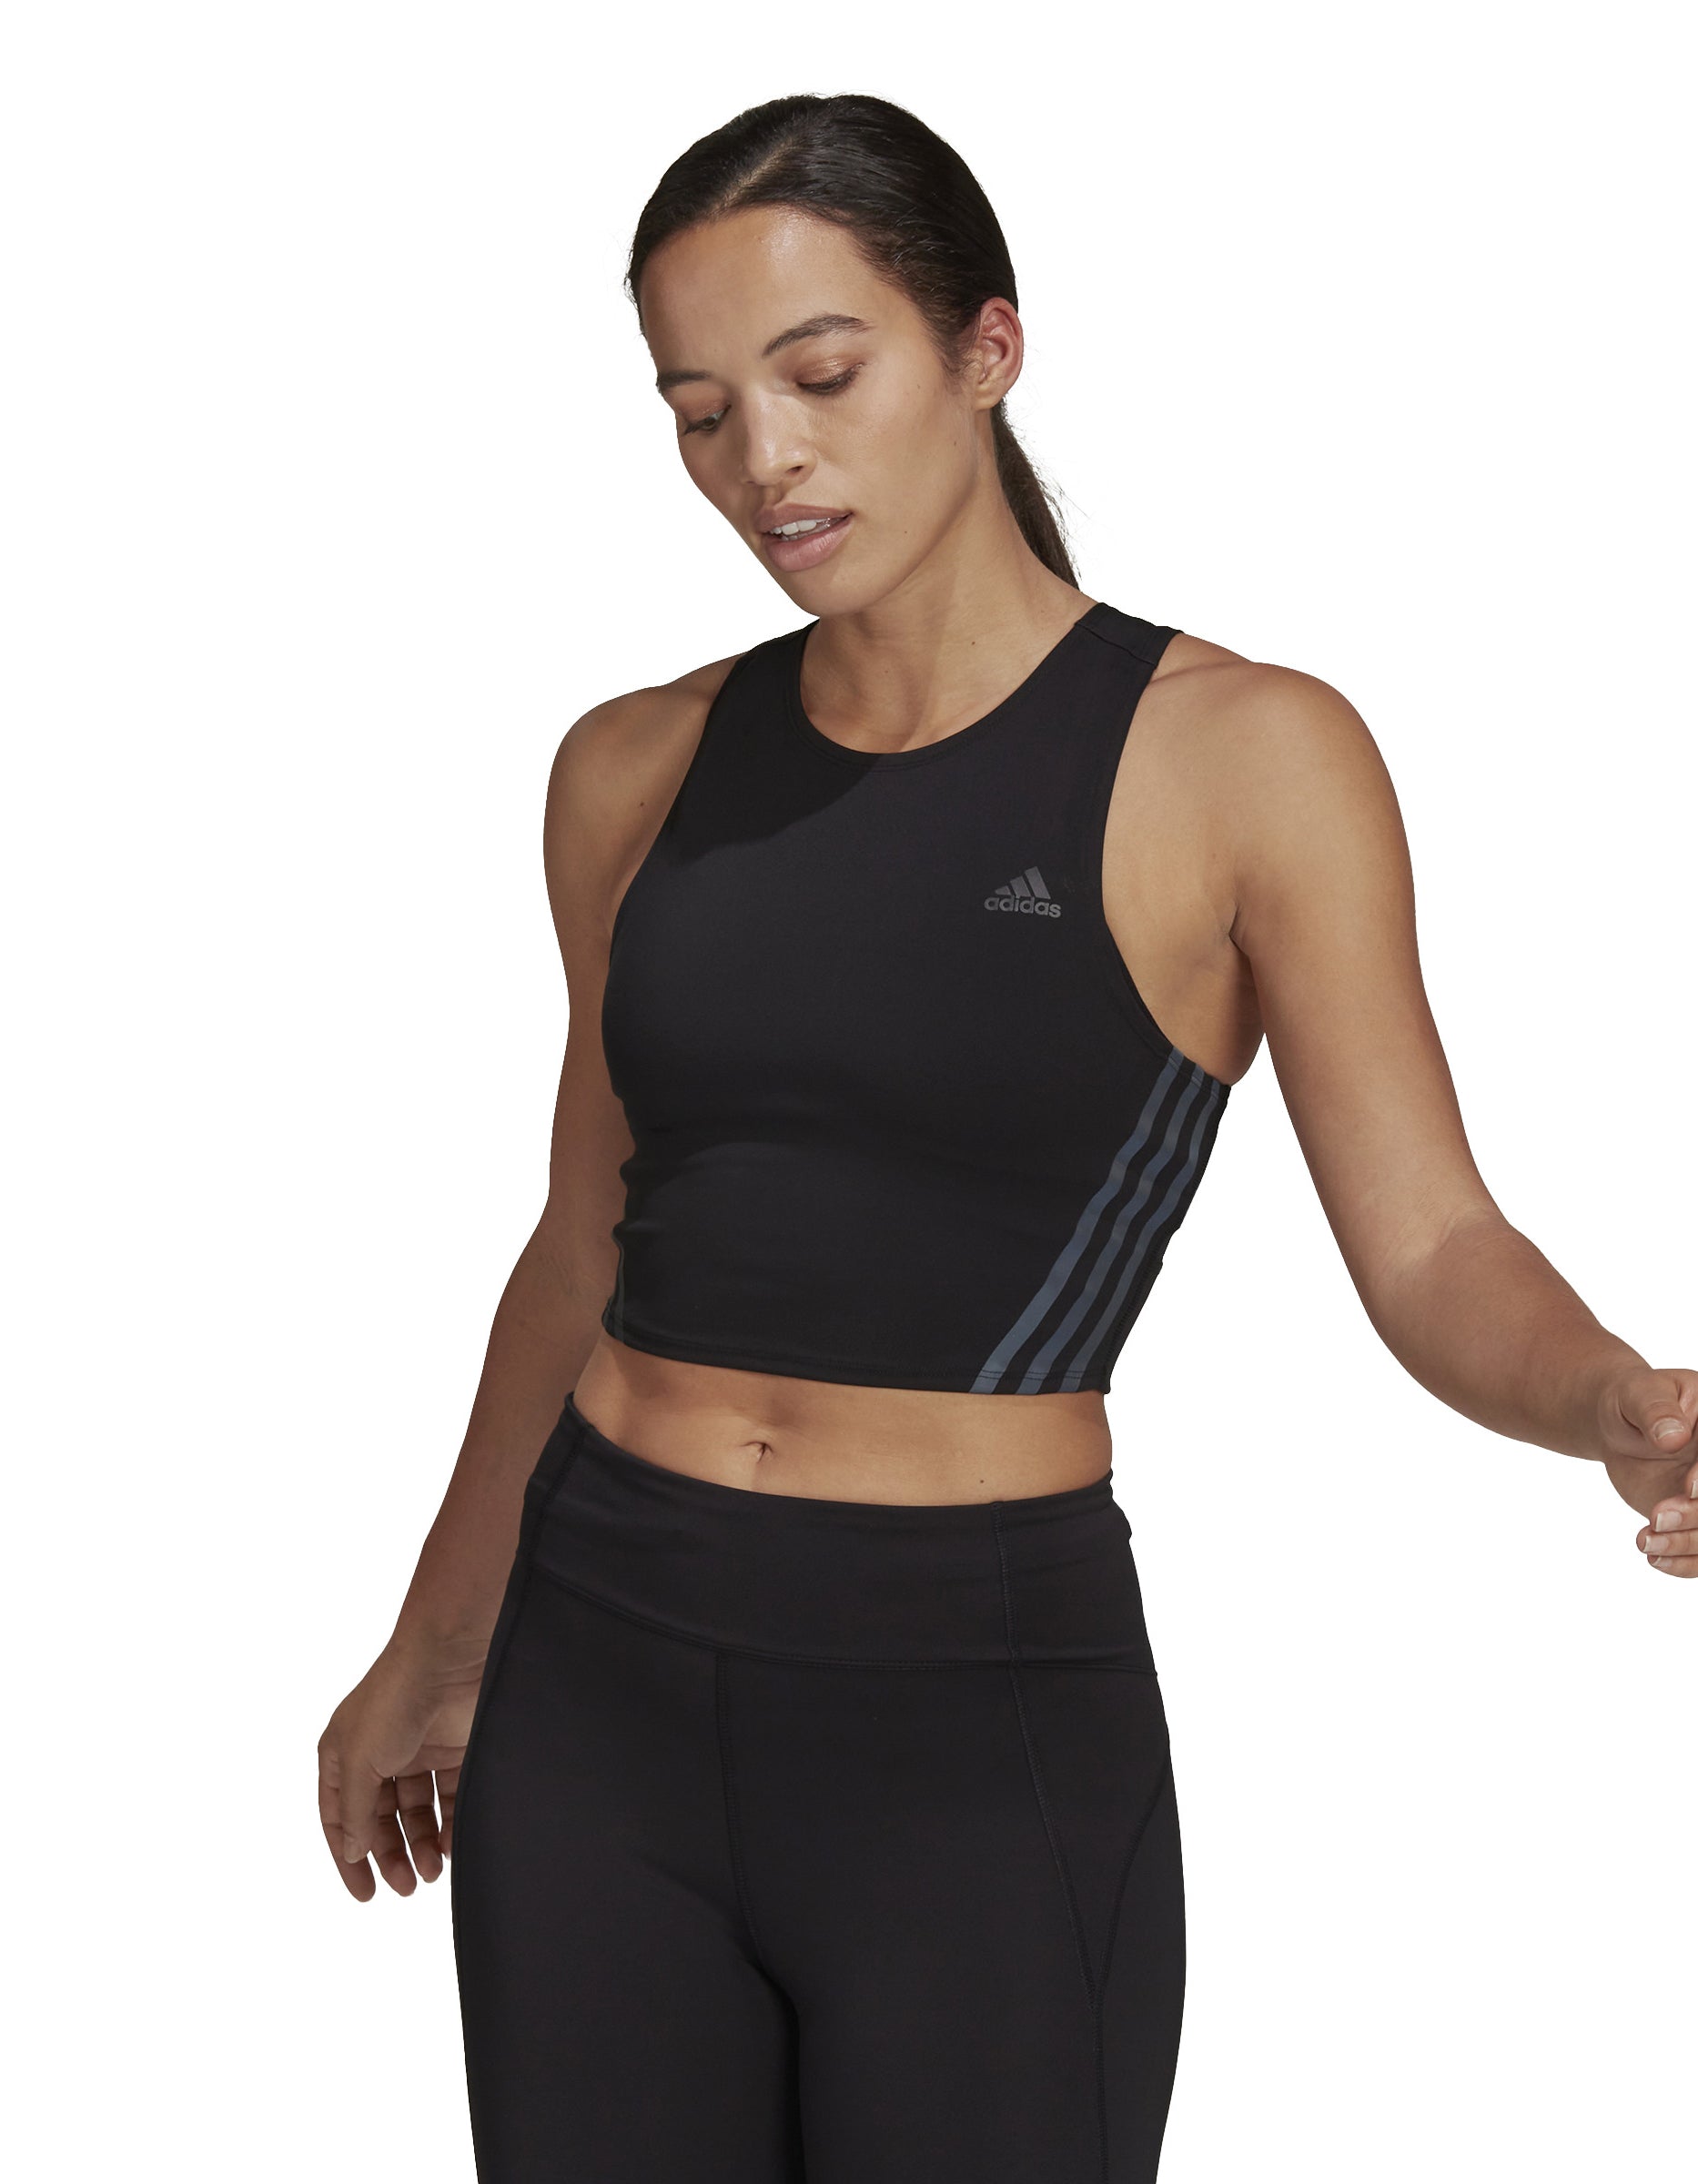 adidas 3-Stripes Running Crop Top Women's | Vancouver Running Company Inc.